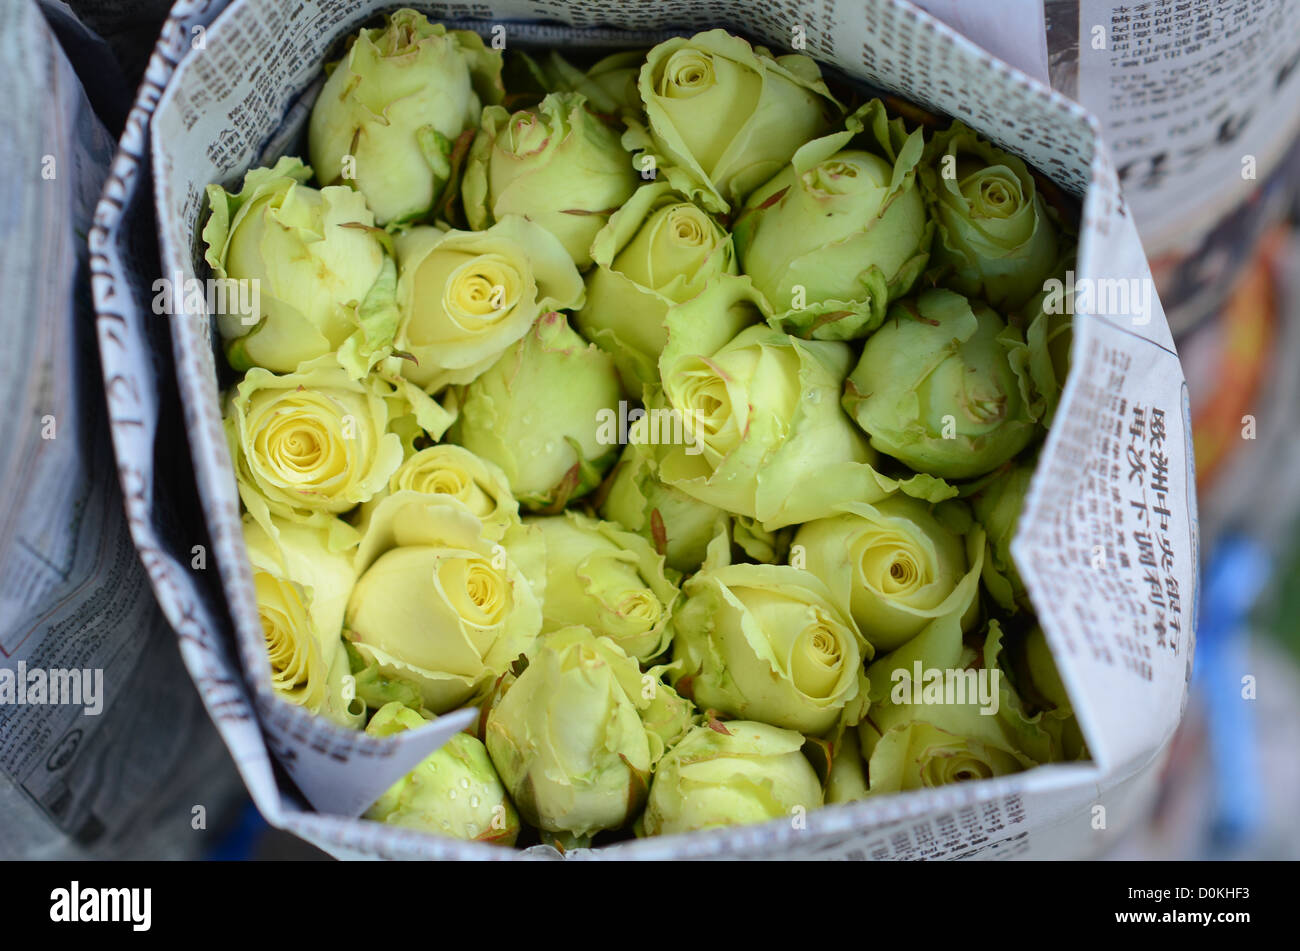 A bunch of roses for sale at a Bangkok flower market. Stock Photo